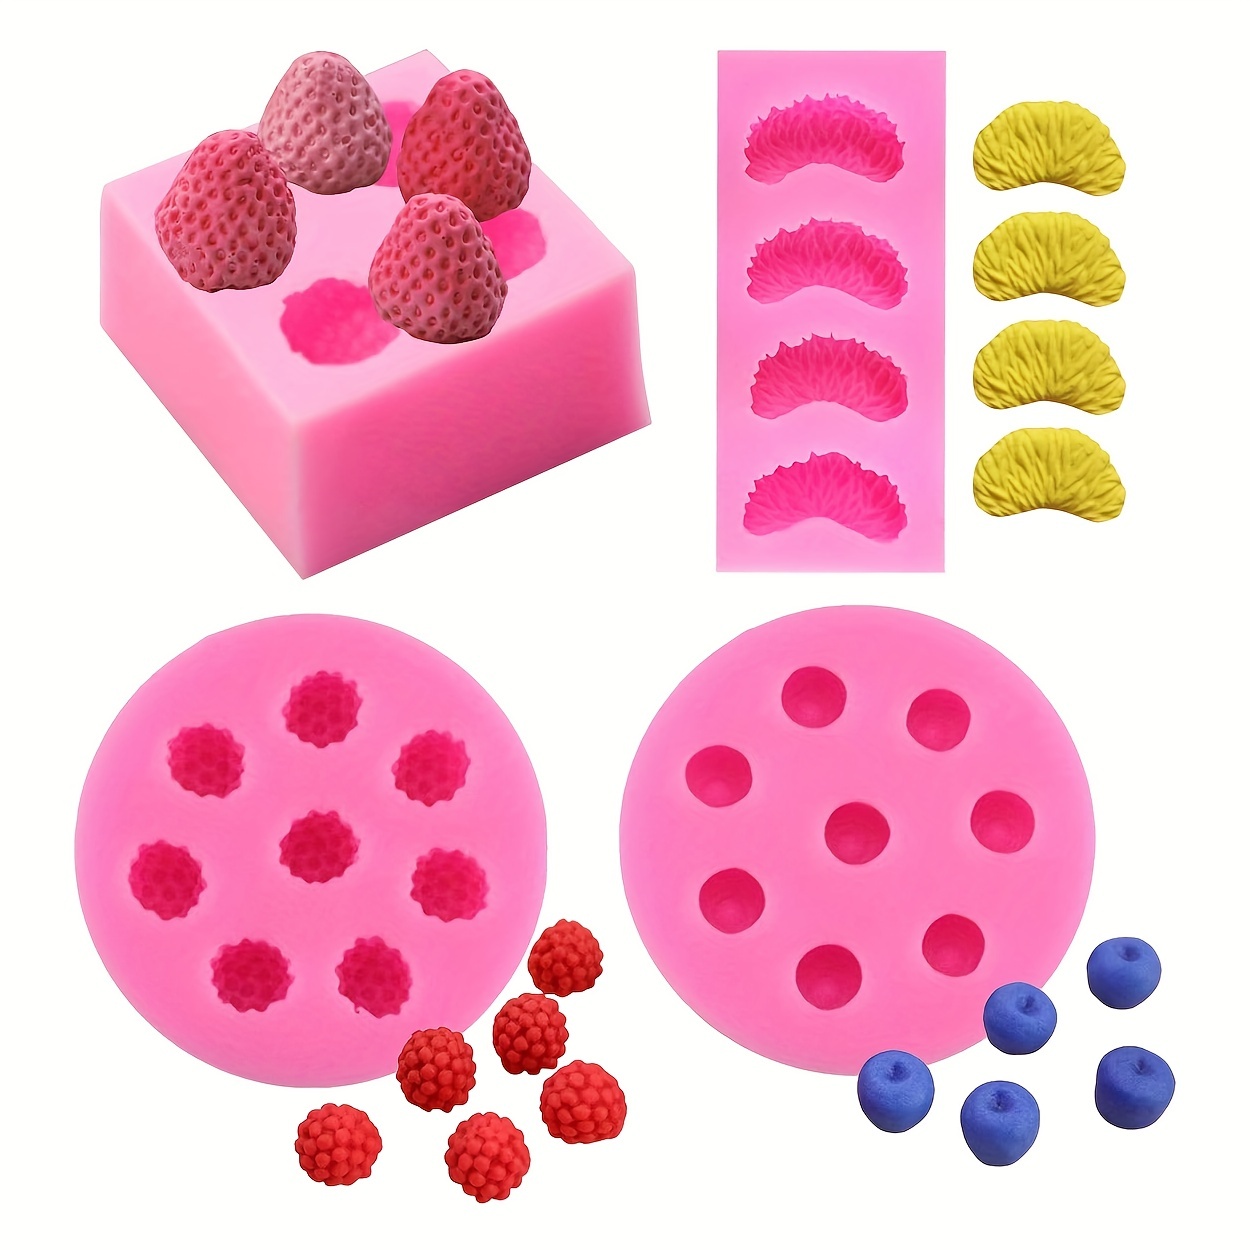 

4pcs, Fruit Shaped Jelly Molds, 3d Strawberry, Tangerine, Raspberry & Blueberry Silicone Fondant Molds, Wax Melts Molds, Candy Mold For Cake Cupcake Topper Decoration